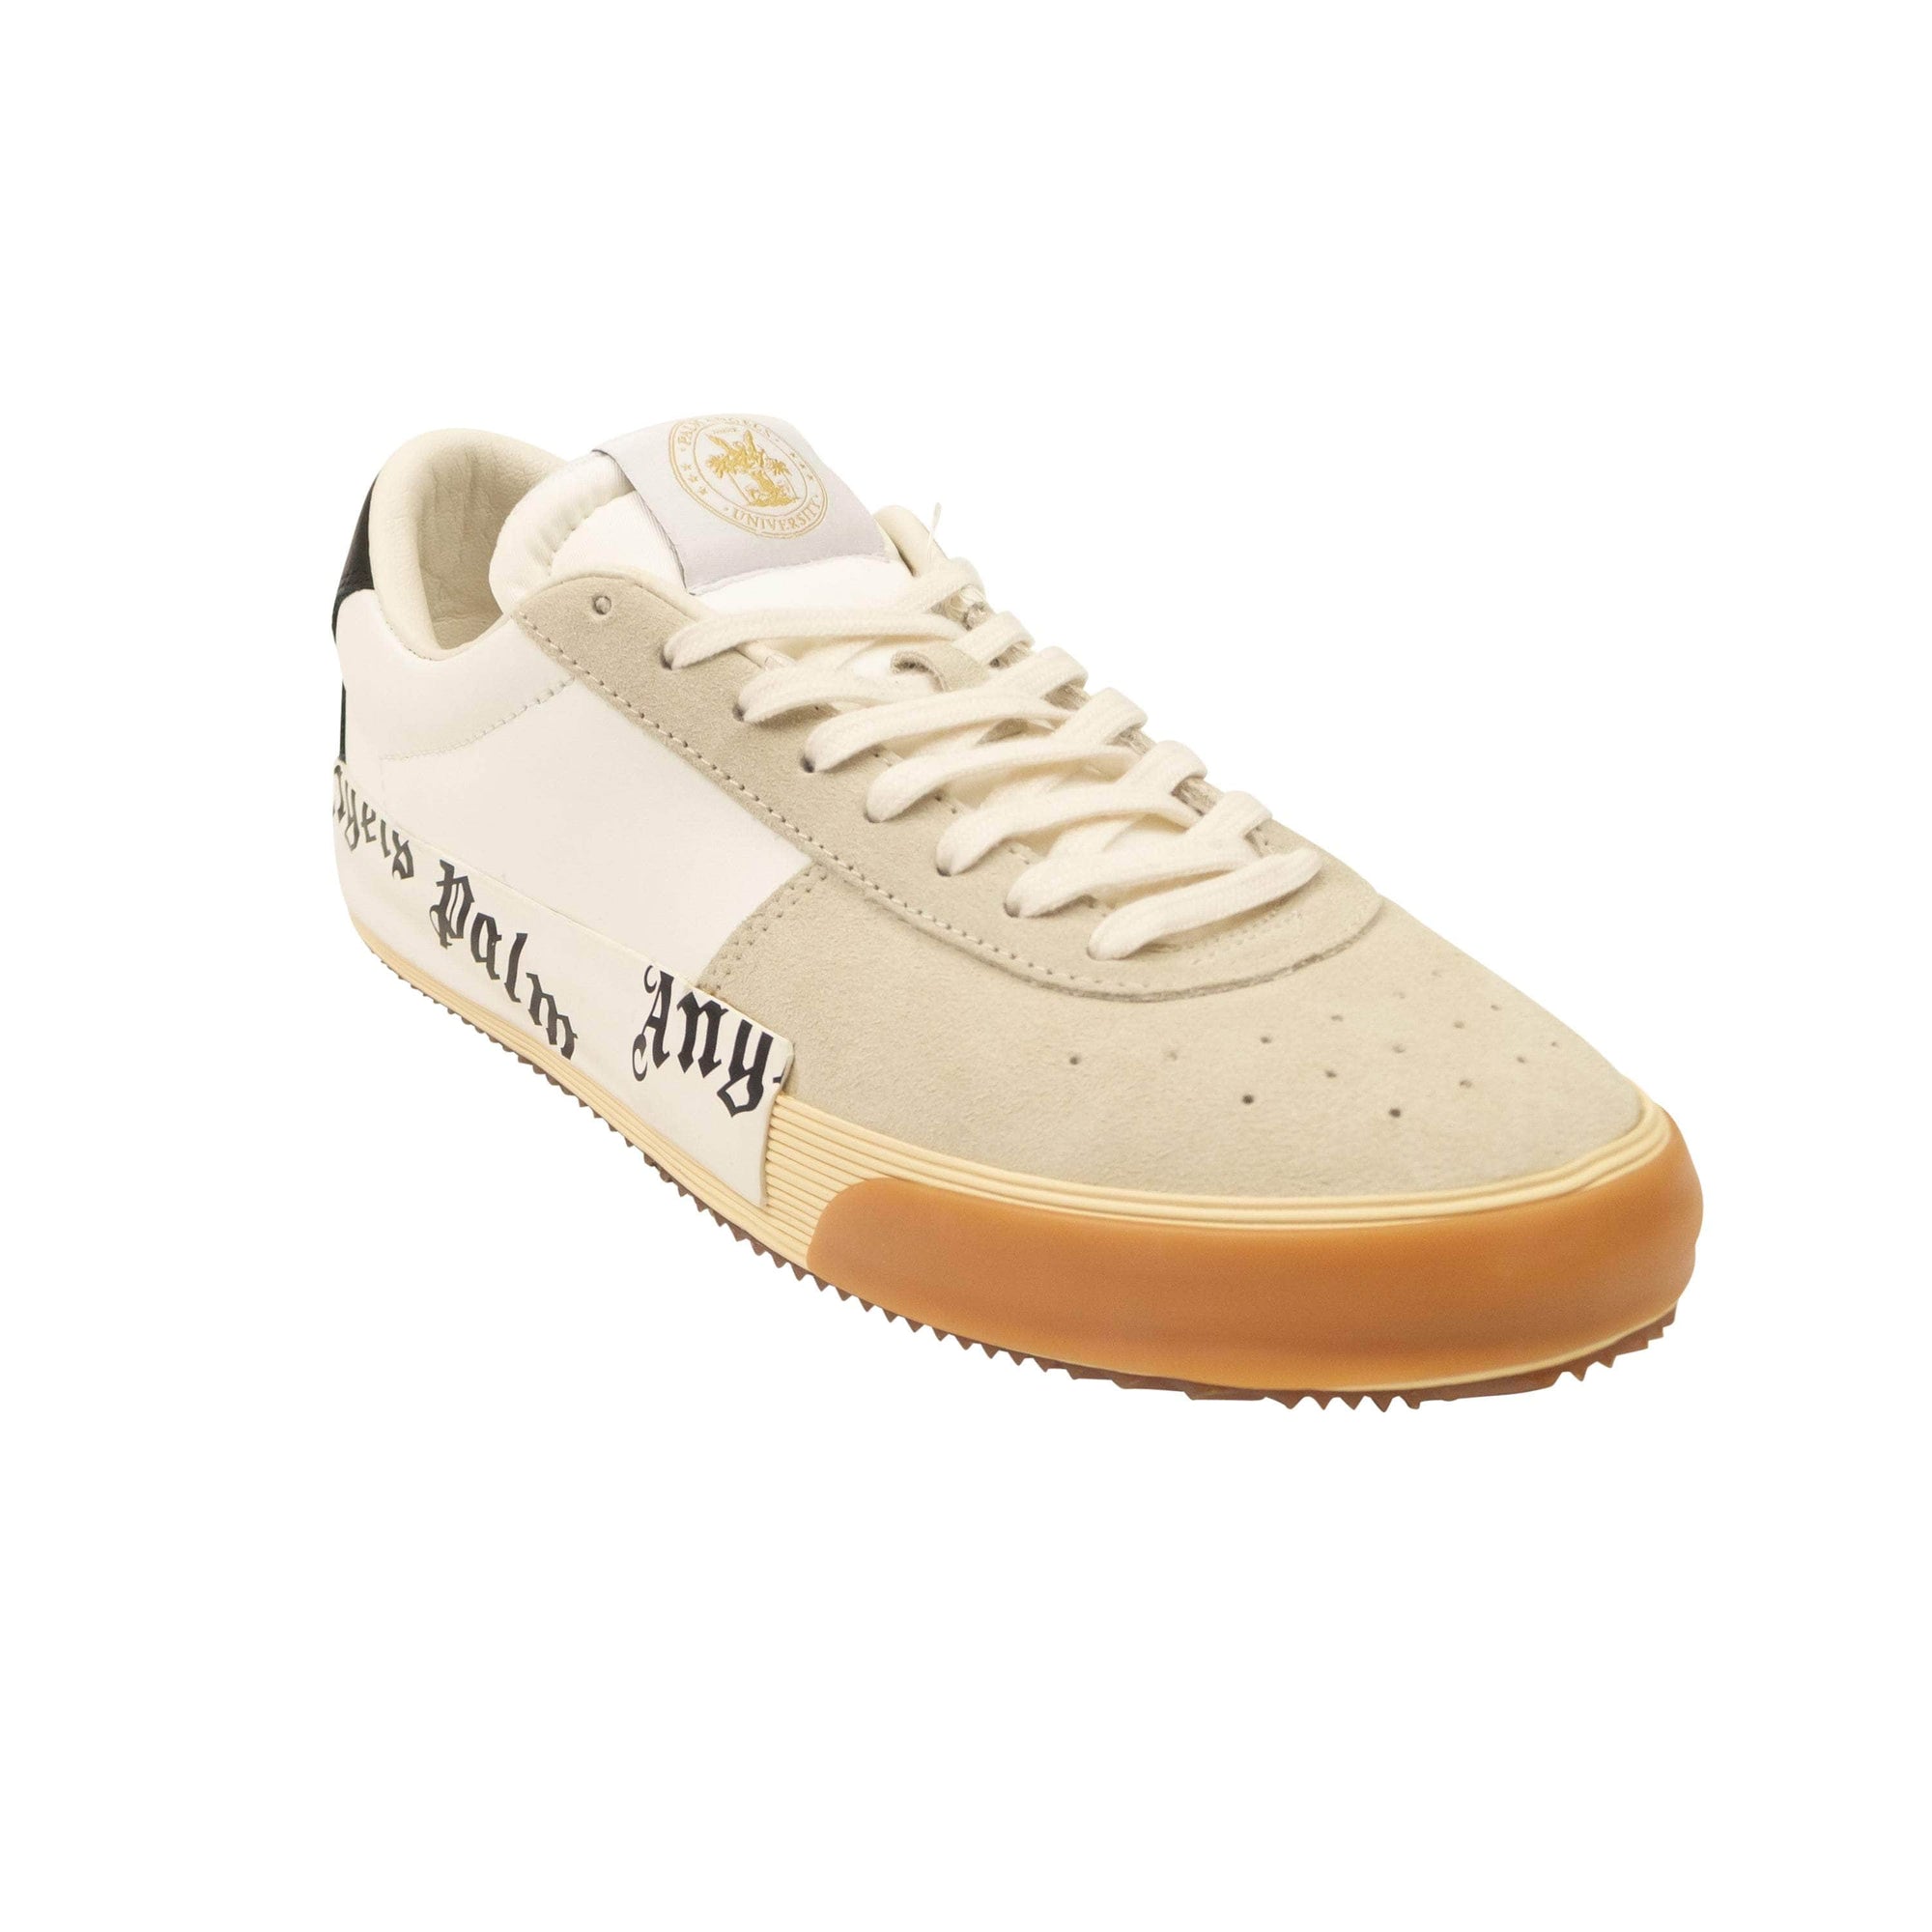 Palm Angels 250-500, channelenable-all, chicmi, couponcollection, gender-mens, main-shoes, mens-shoes, palm-angels, size-41, size-42 White And Beige New Vulcanized Sneakers